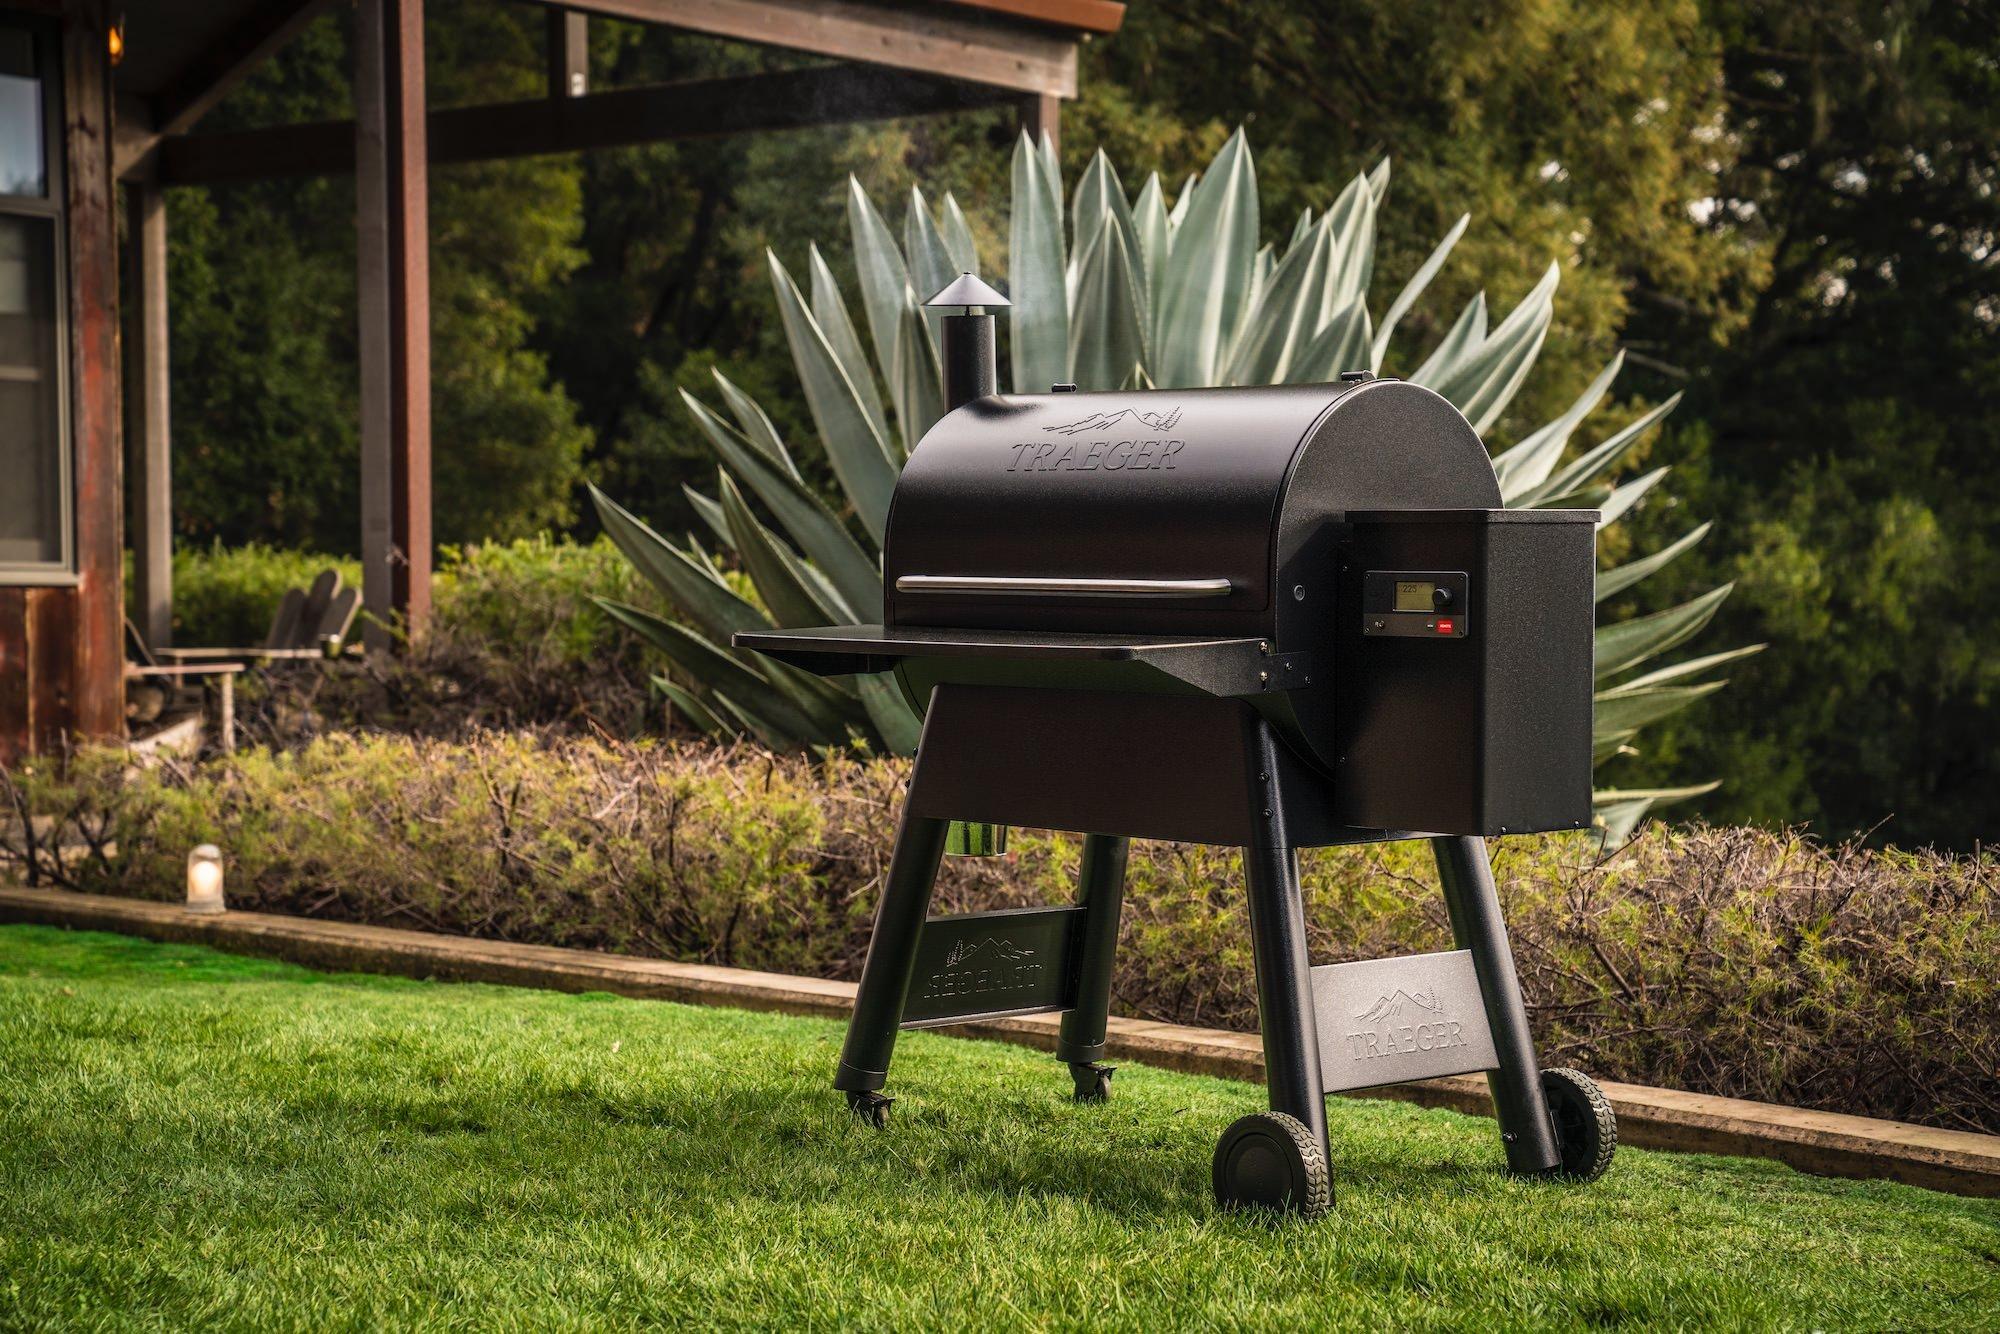 Traeger Pro 780 Black Wood Pellet Grill Lifestyle on the Grass